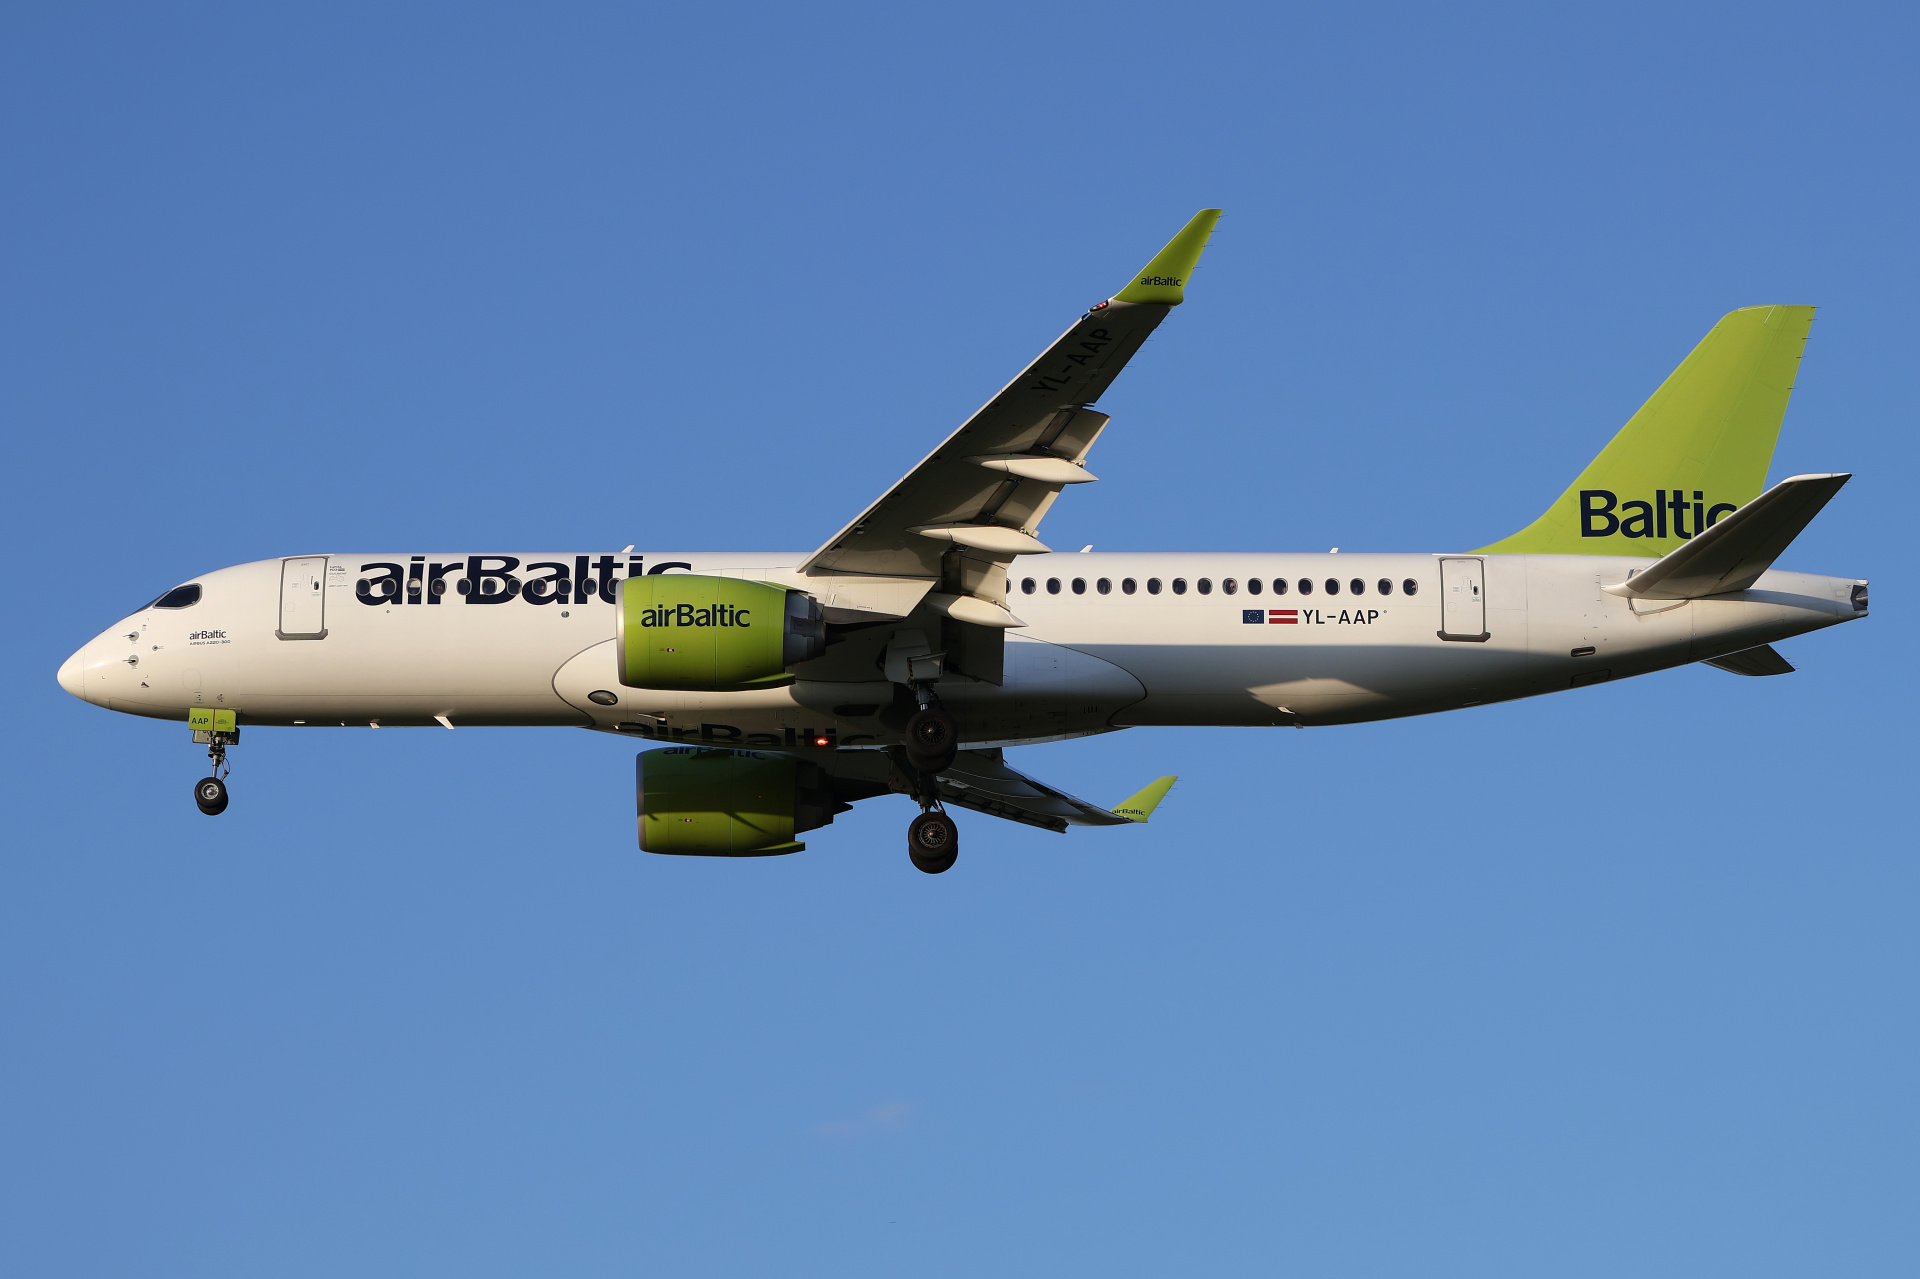 YL-AAP (Aircraft » EPWA Spotting » Airbus A220-300 » airBaltic)